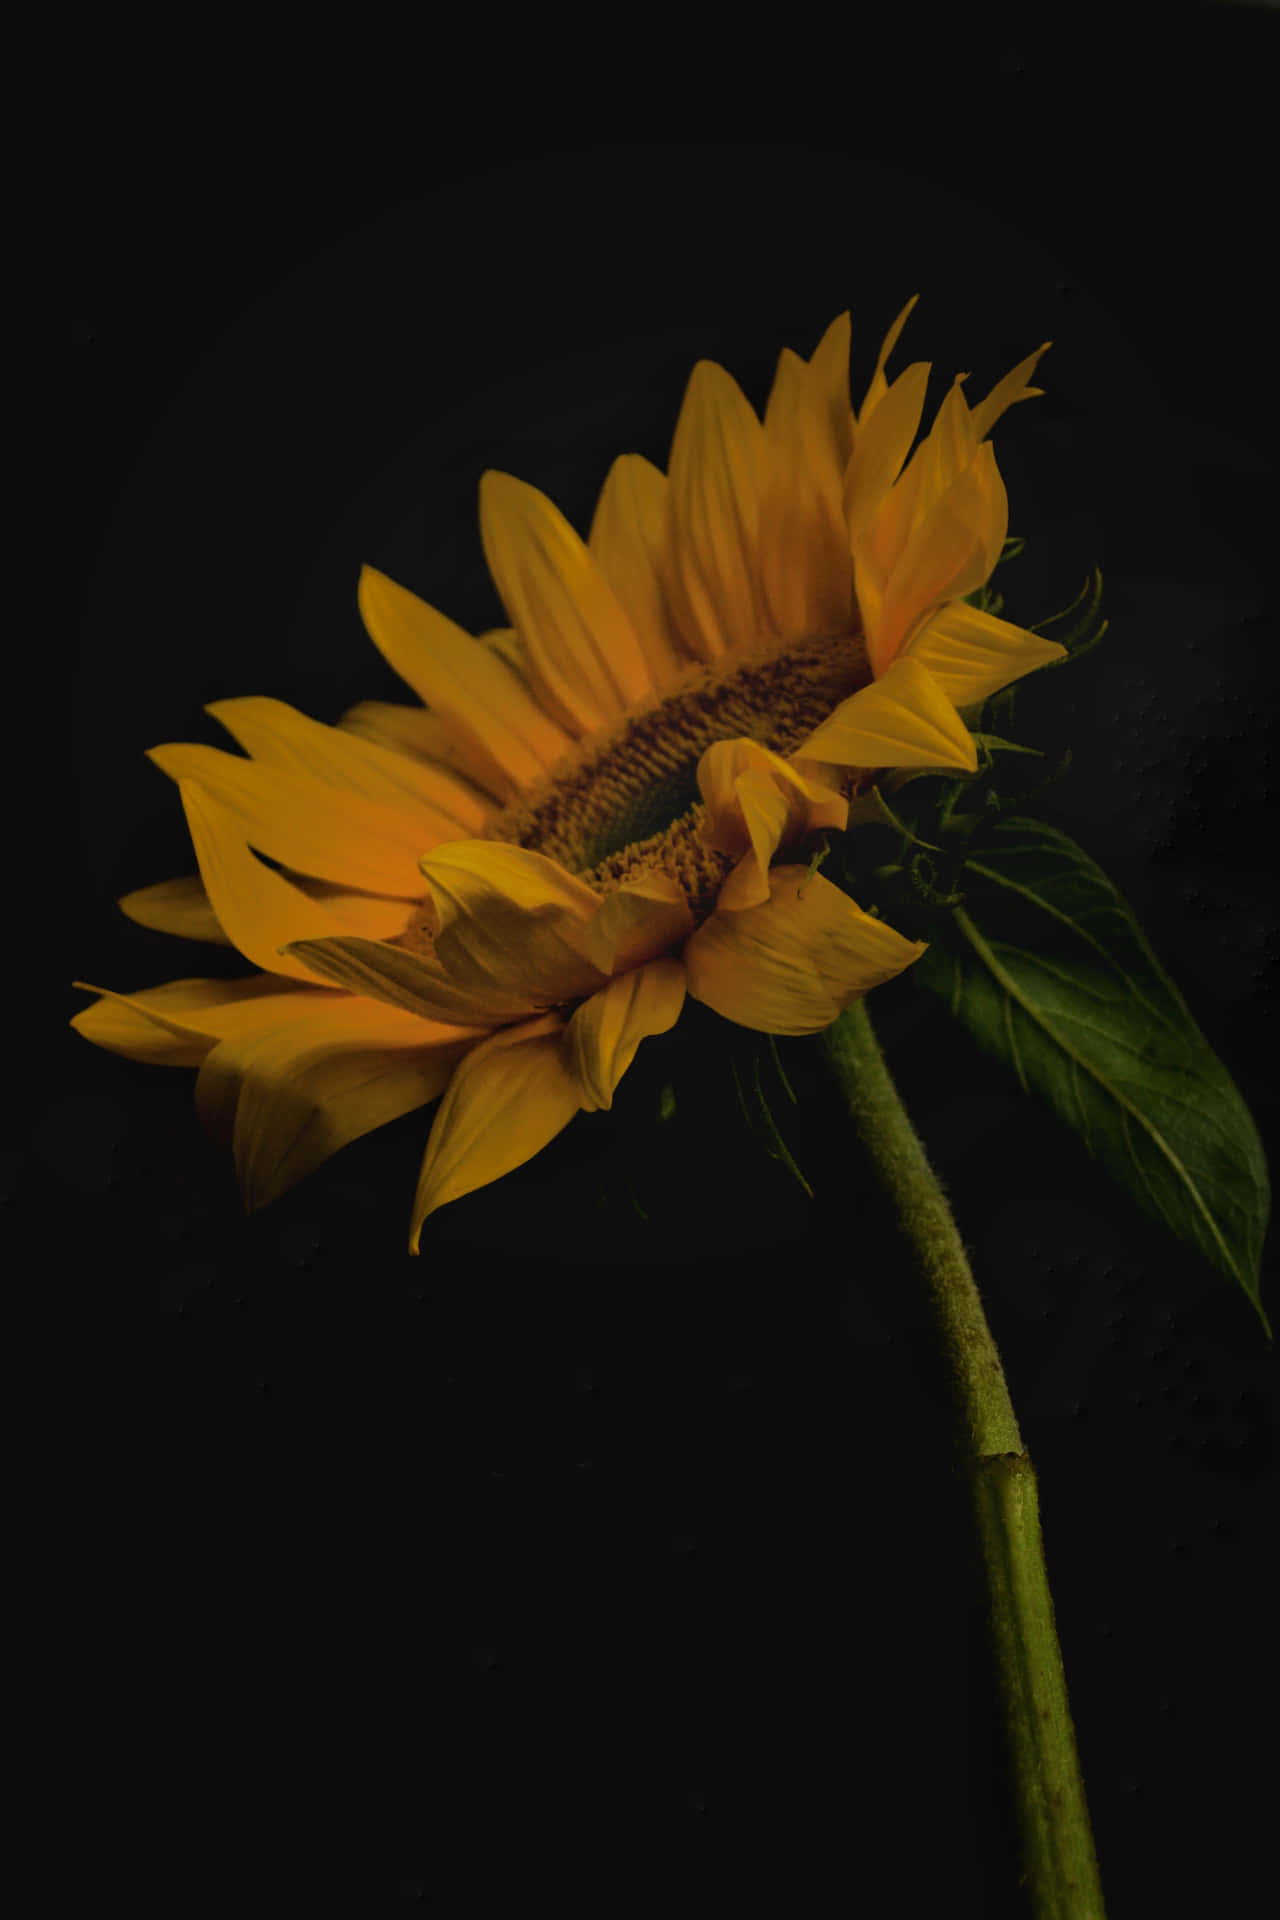 A dark sunflower surrounded by yellow petals Wallpaper